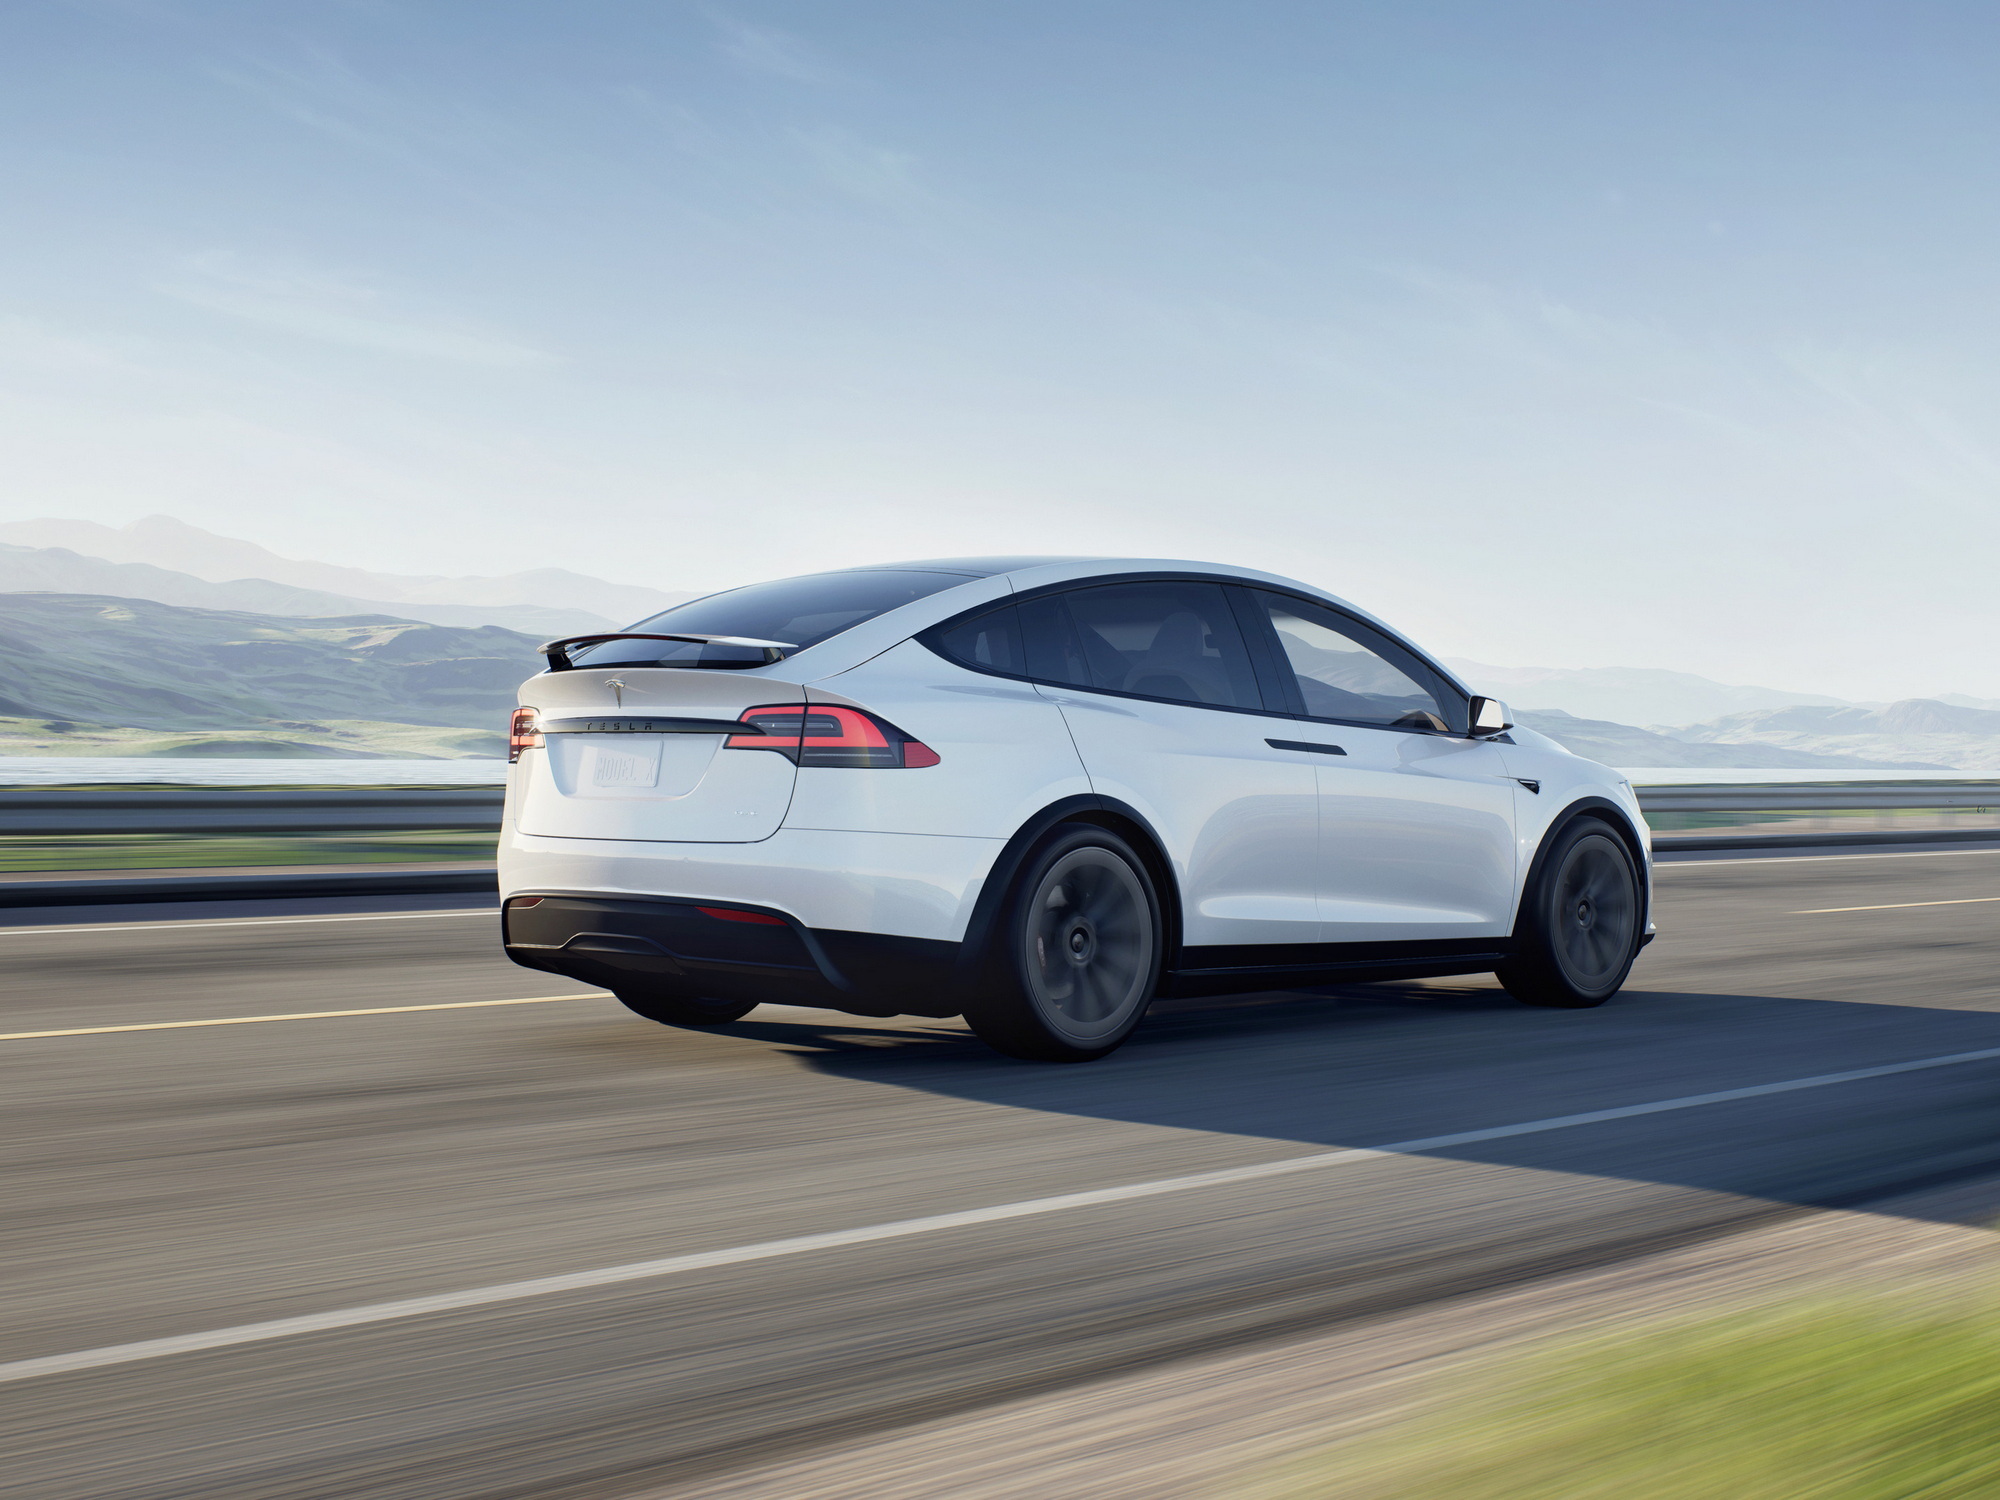 Tesla Delivered A Record 466,140 Vehicles Last Quarter Or Up 83% Year ...